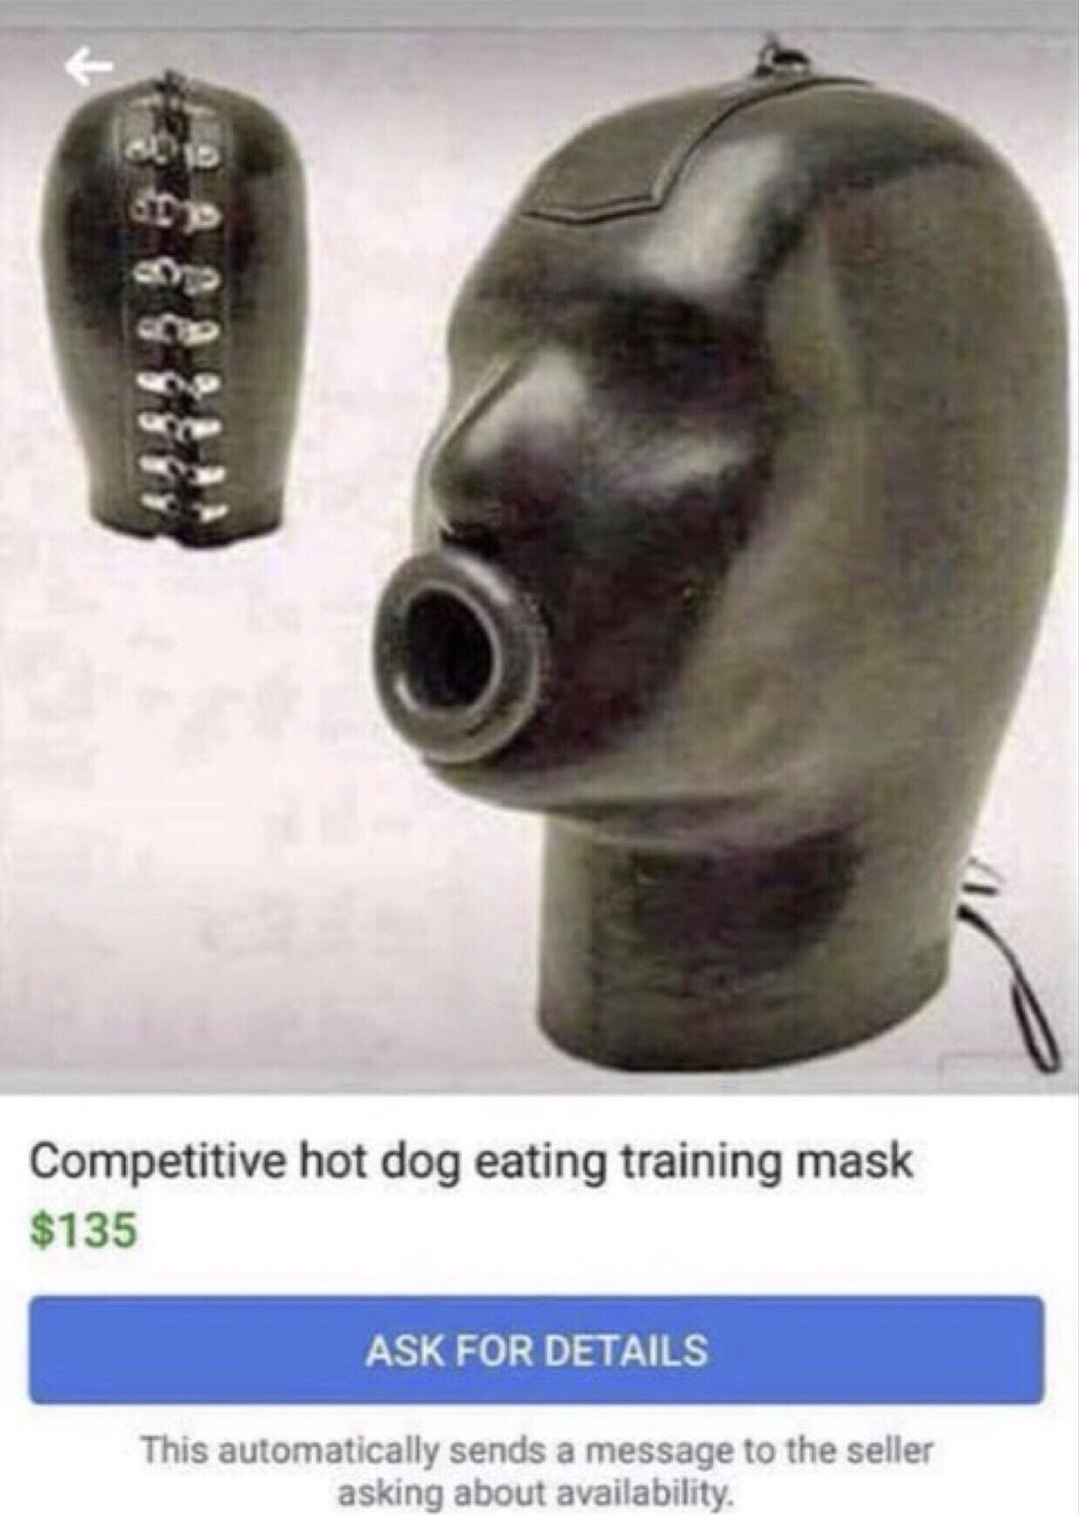 memes - hot dog competition mask - U Competitive hot dog eating training mask $135 Ask For Details This automatically sends a message to the seller asking about availability.